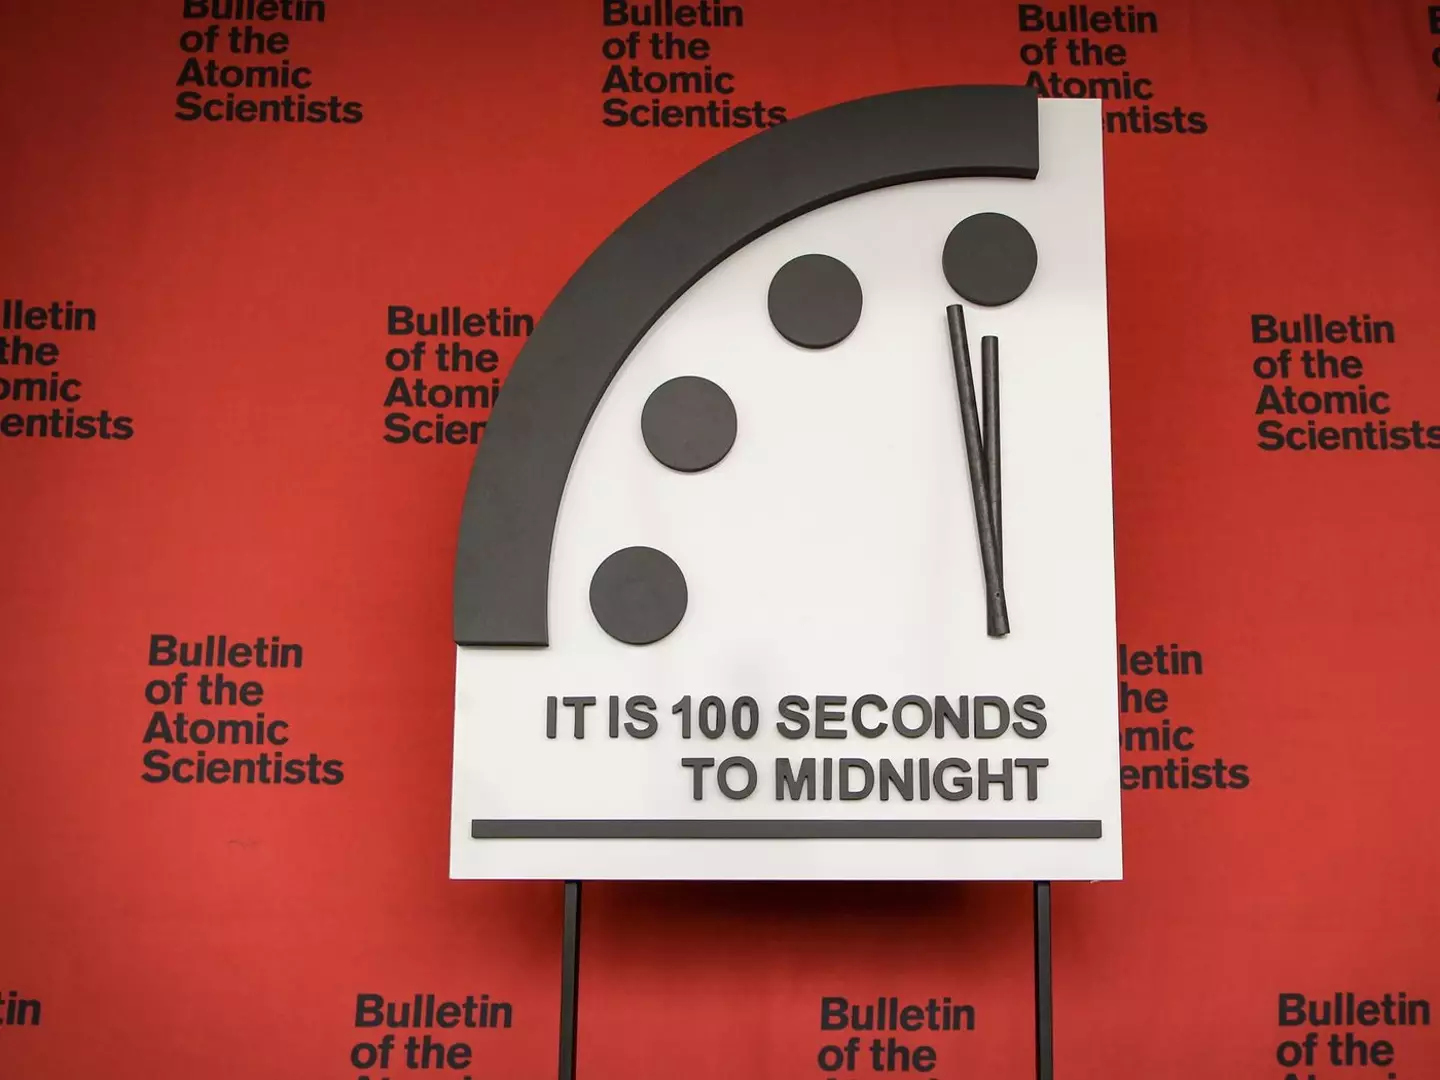 The Doomsday Clock has never been closer to midnight.